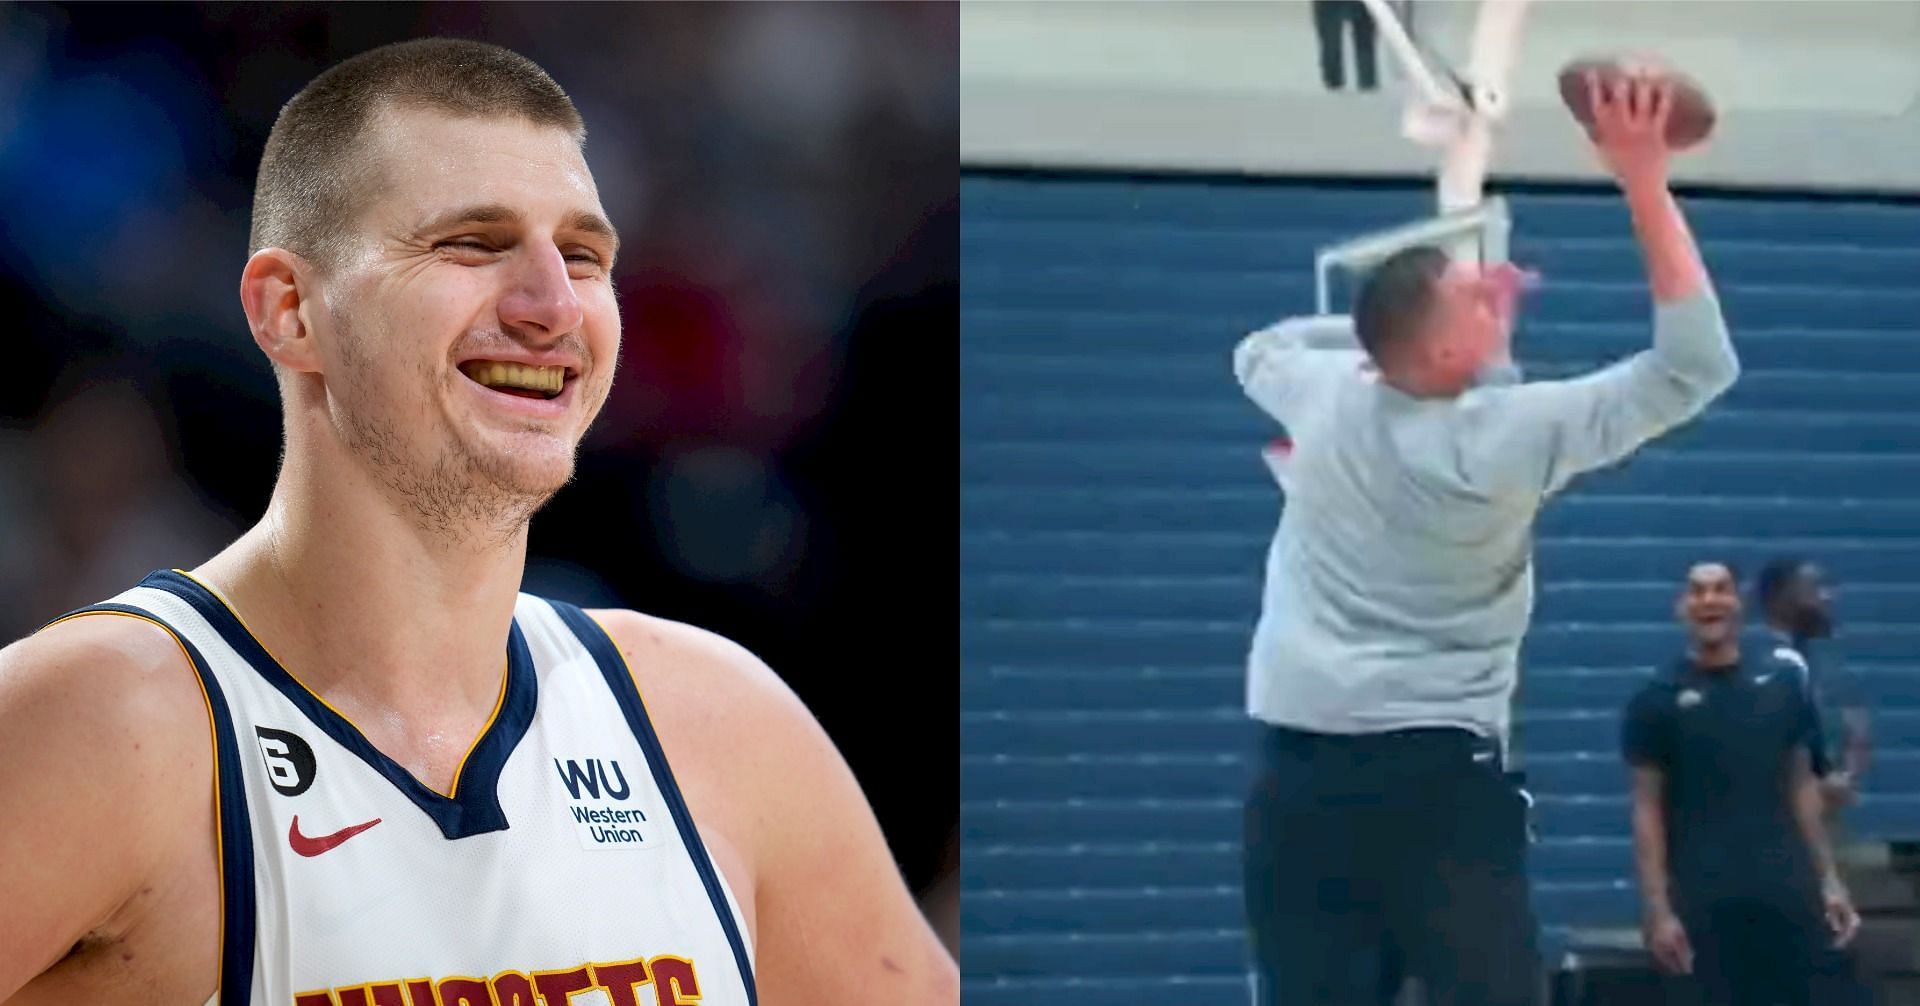 Nikola Jokic turns on the jets before leaping into the air to make a stunning grab